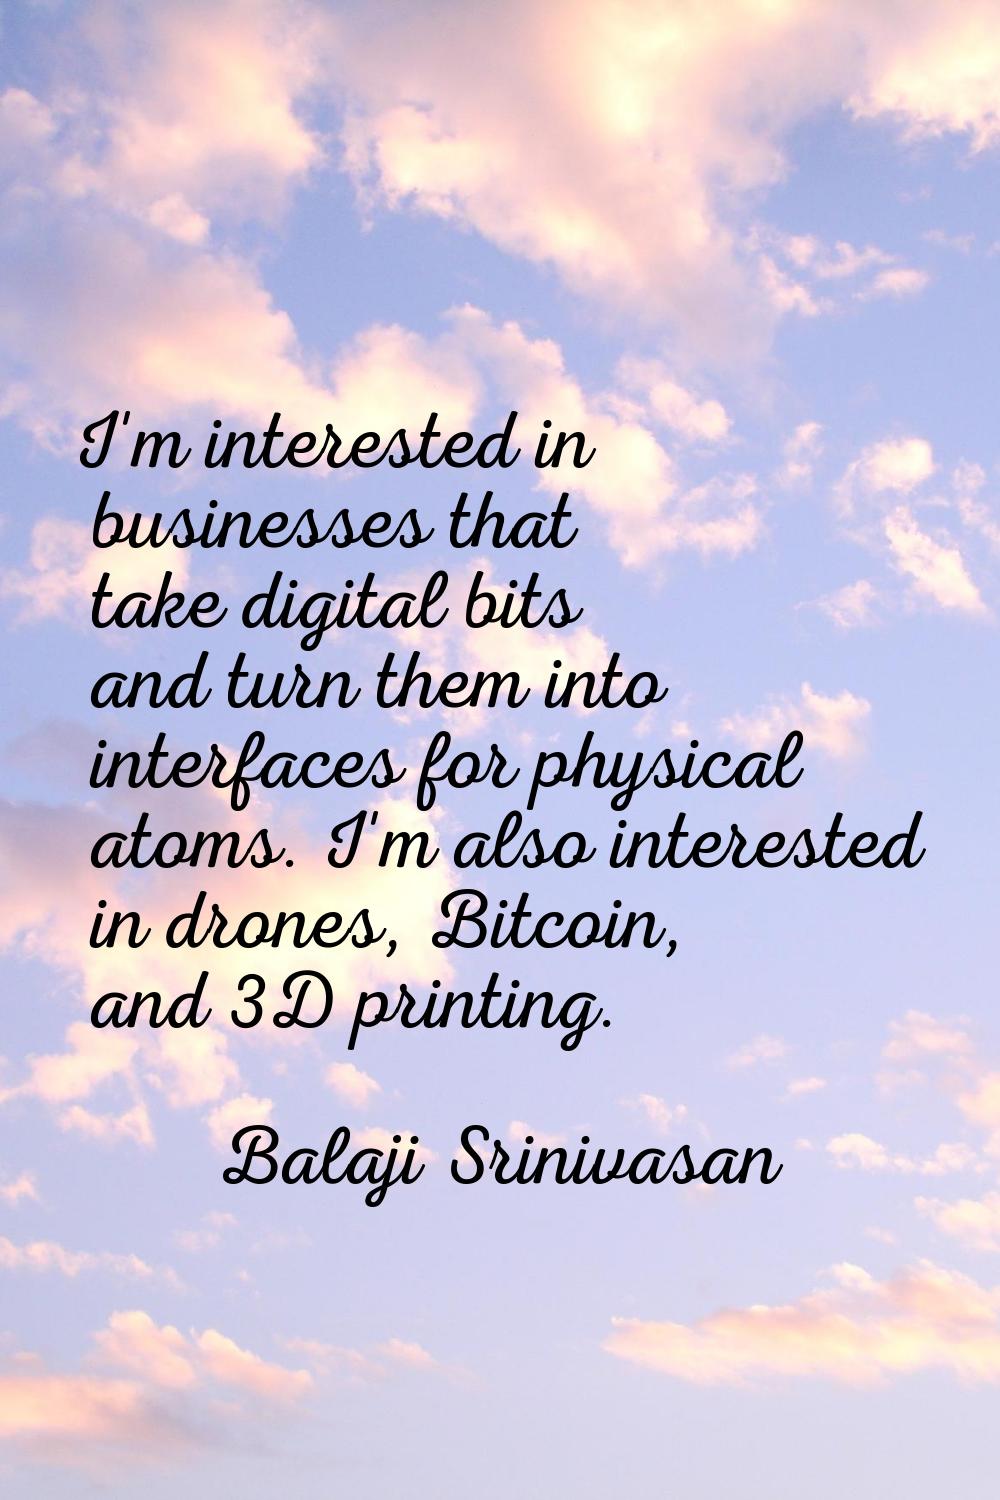 I'm interested in businesses that take digital bits and turn them into interfaces for physical atom